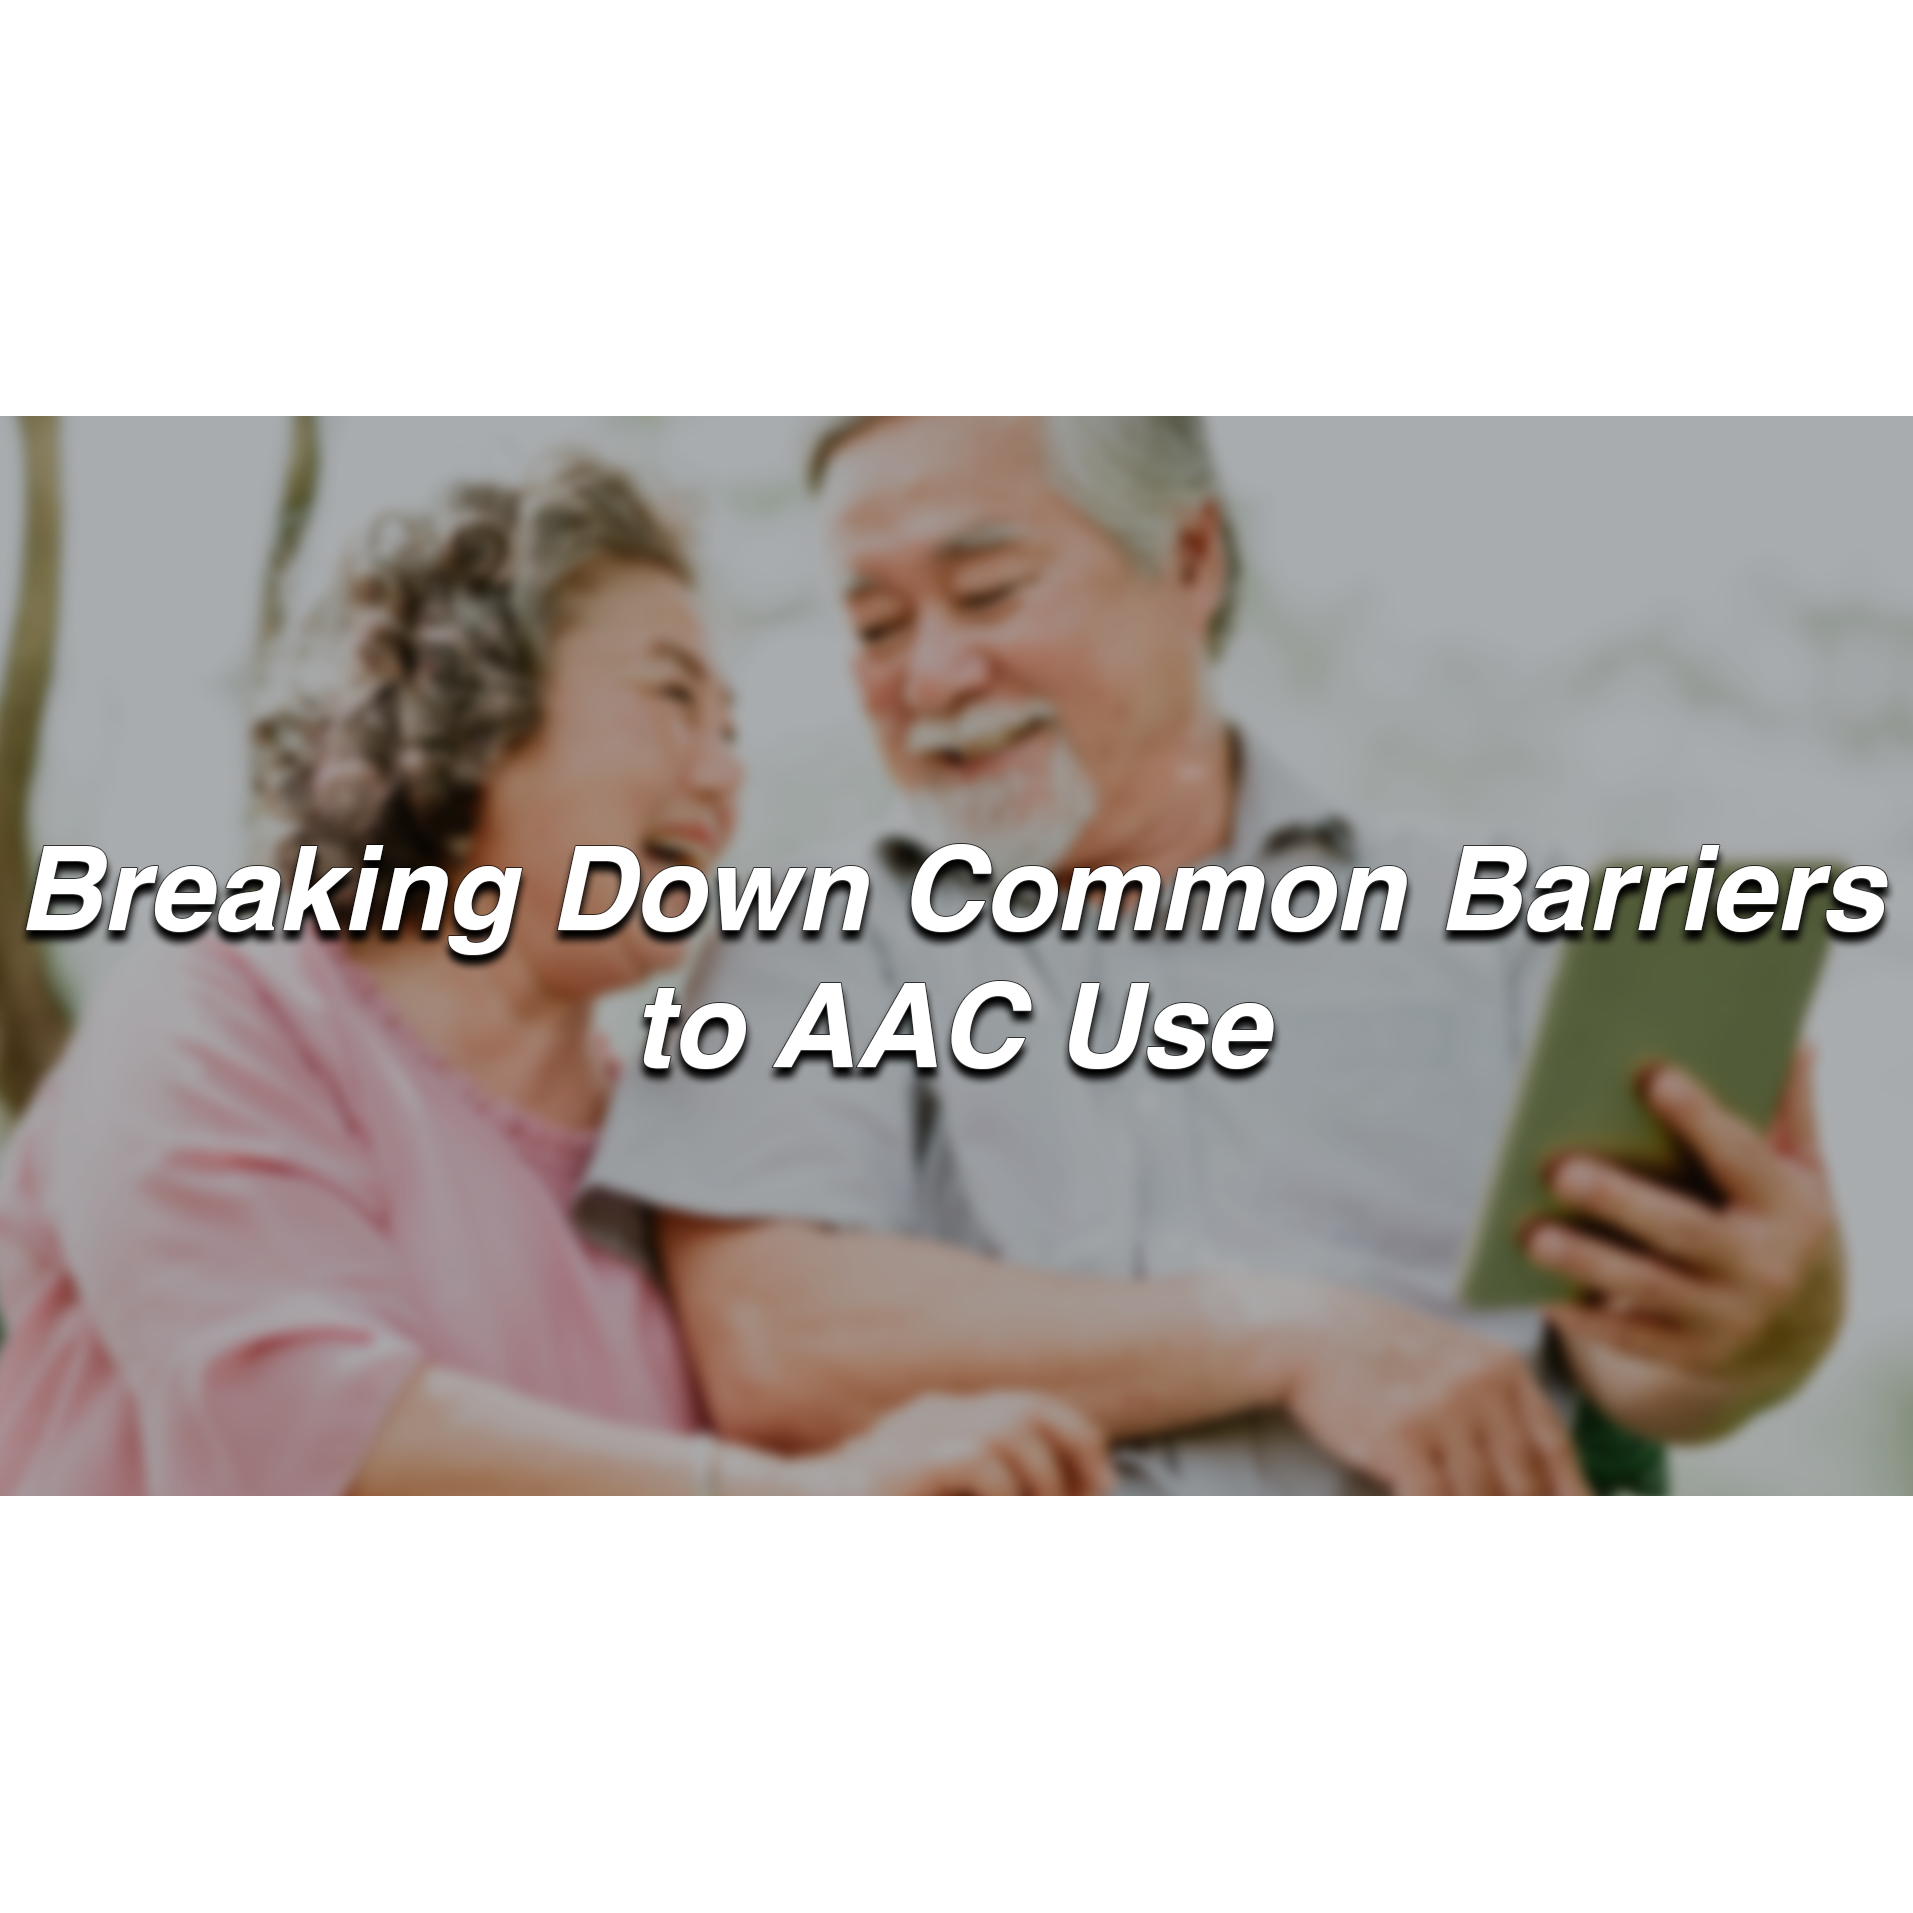 Breaking Down Common Barriers to AAC Use